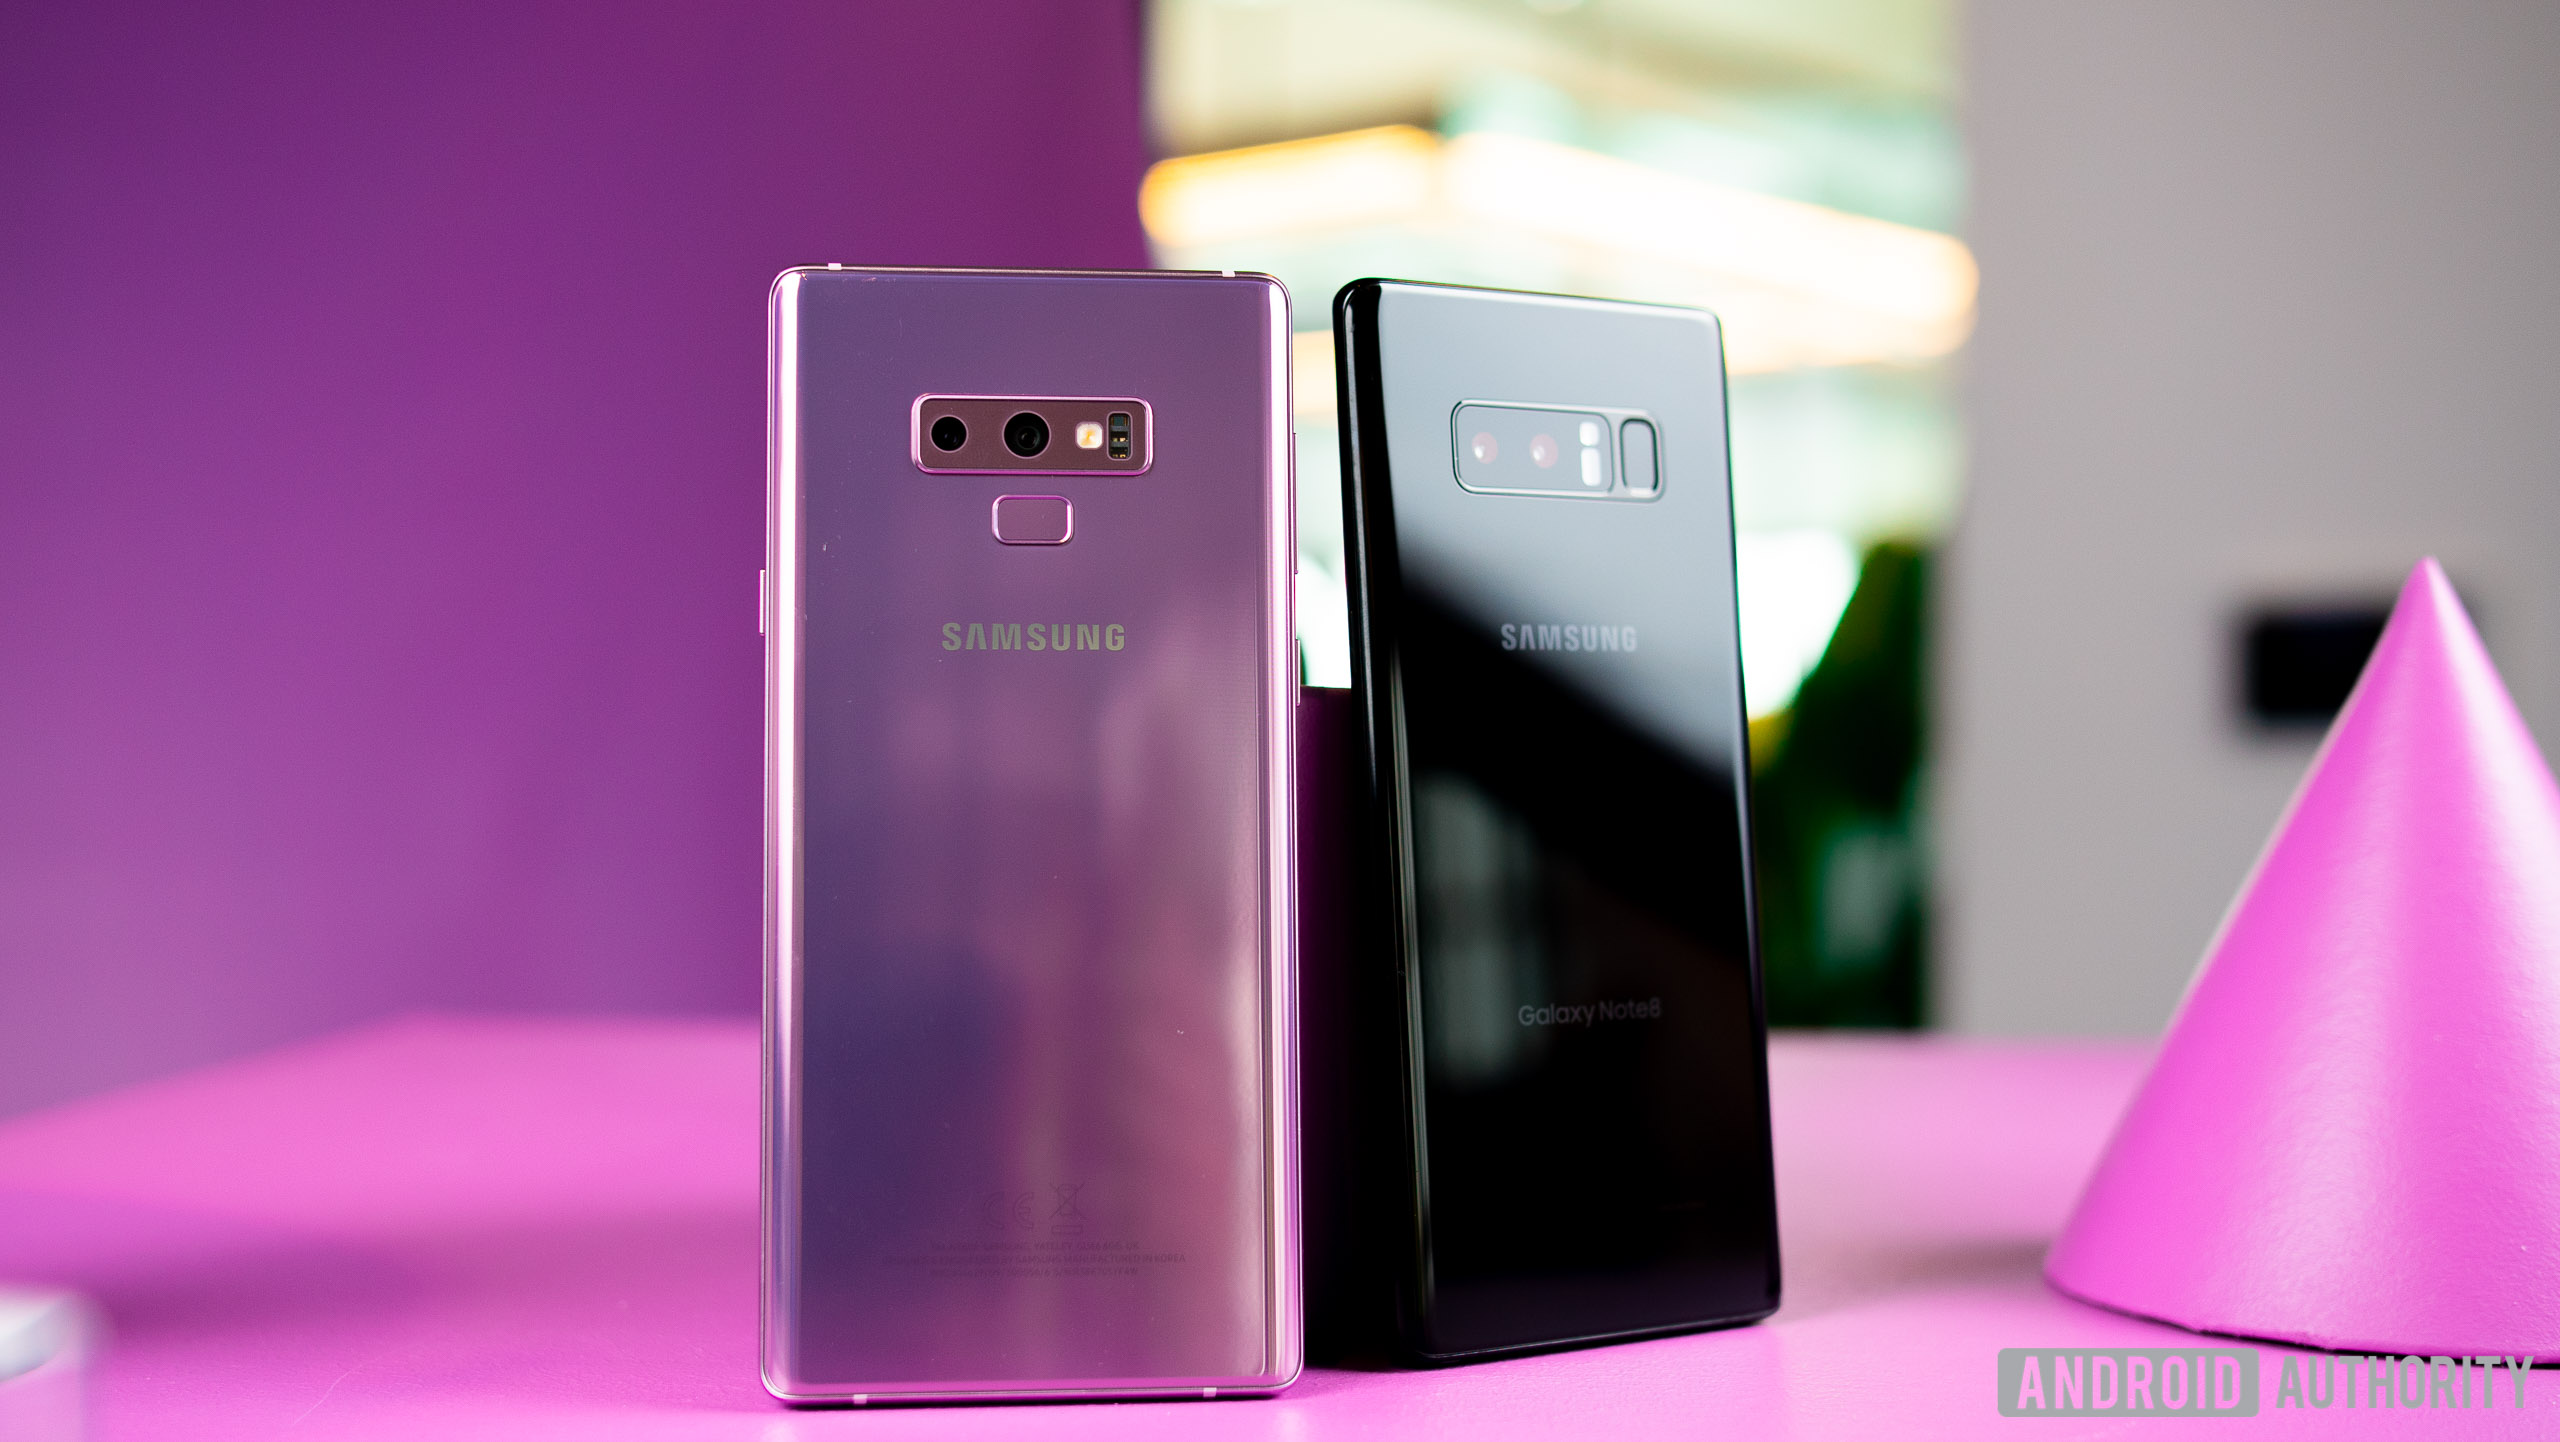 samsung galaxy note 9 pink and black version